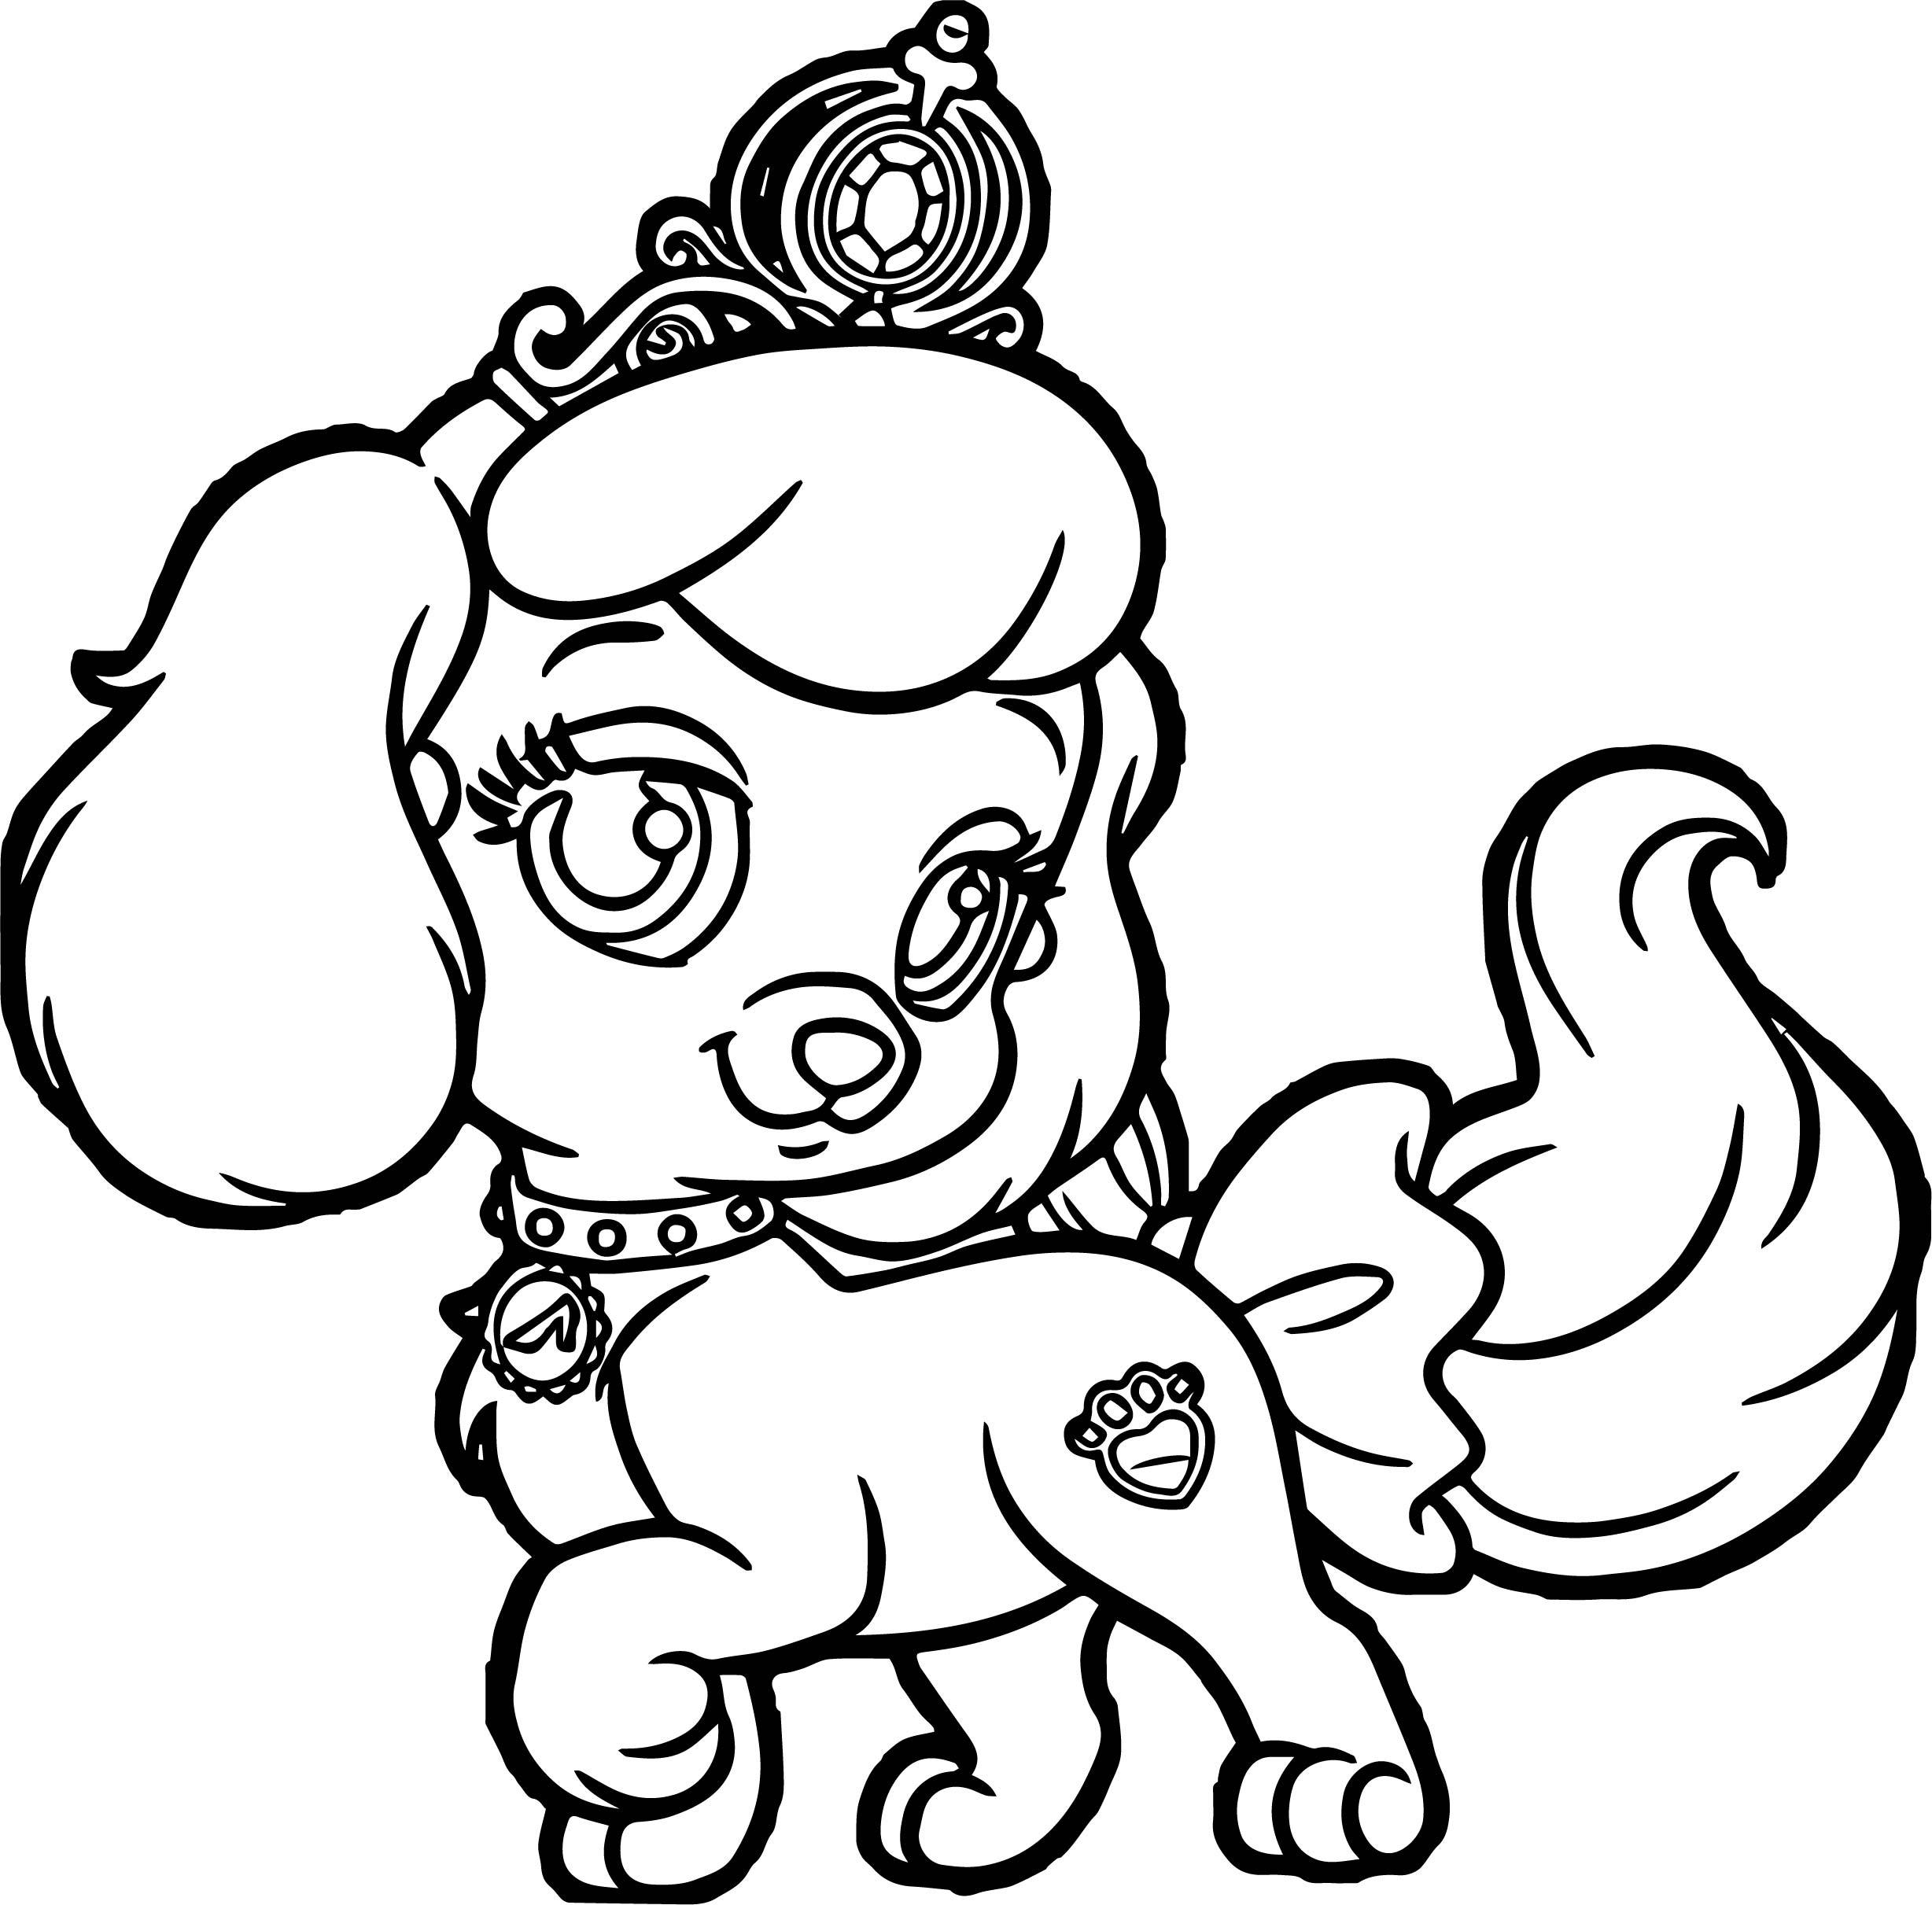 Sad Puppy Coloring Pages at GetColorings.com | Free printable colorings